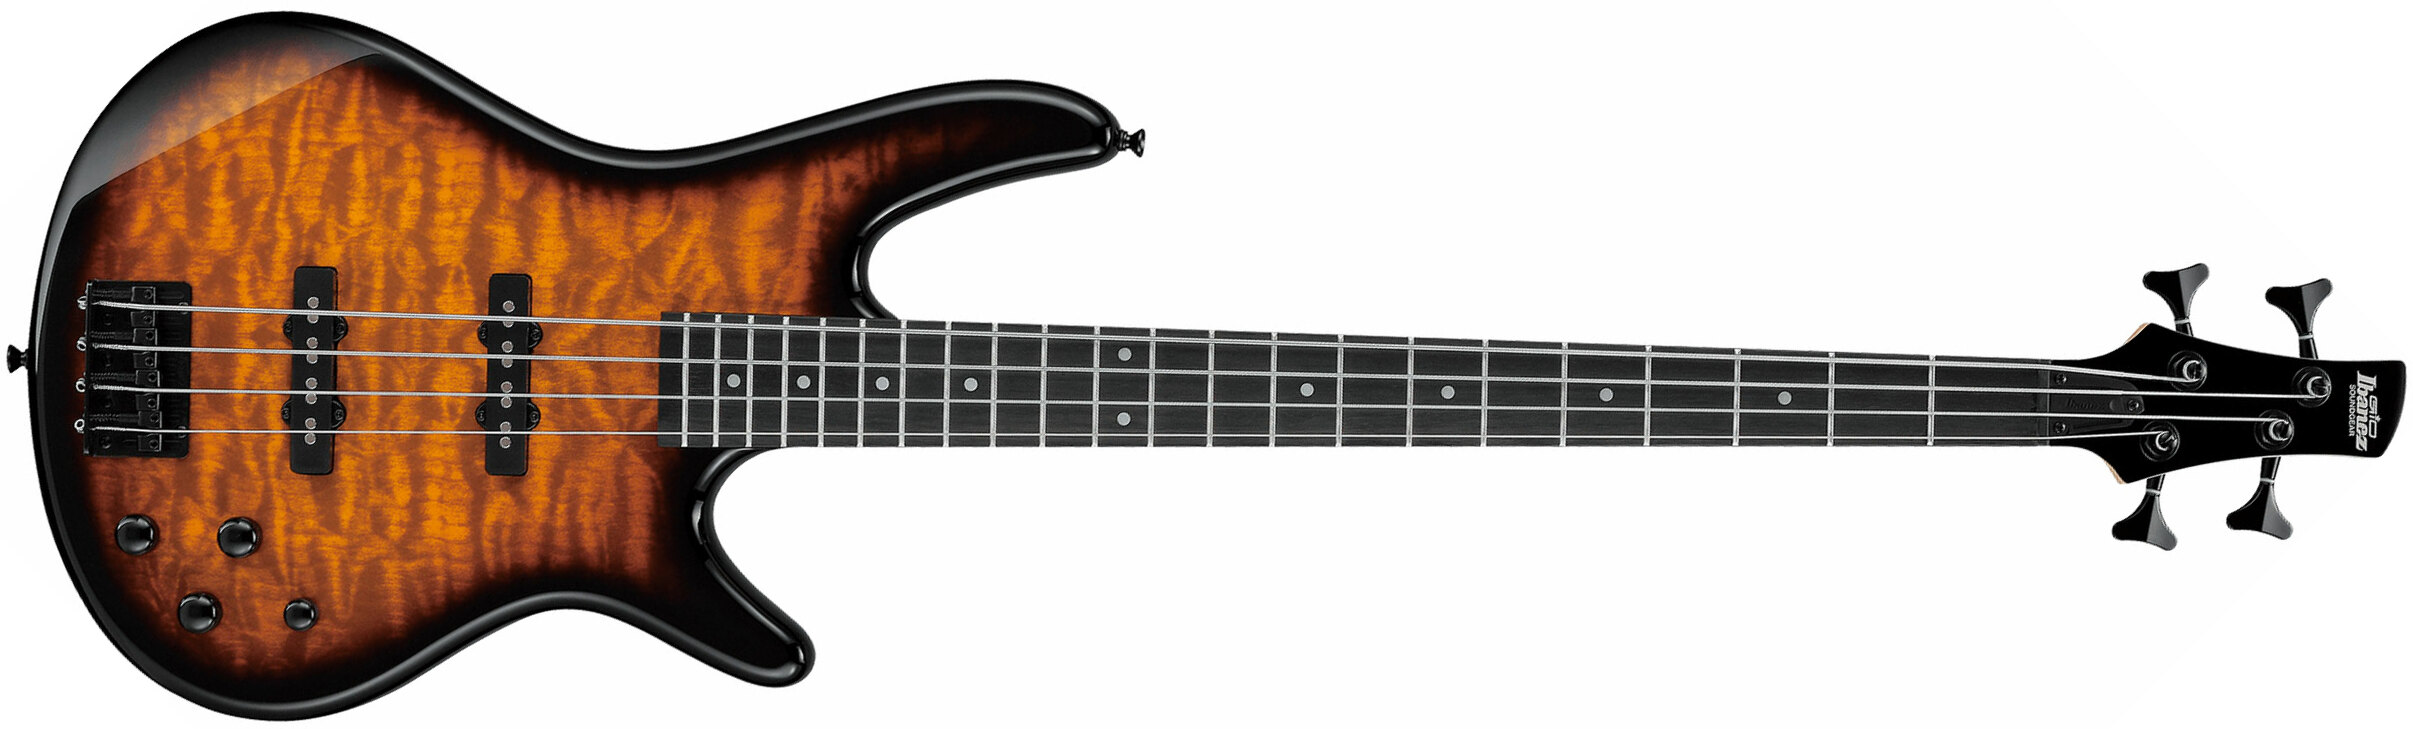 Ibanez Gsr280qa Tys Gio Pur - Transparent Yellow Sunburst - Solid body electric bass - Main picture